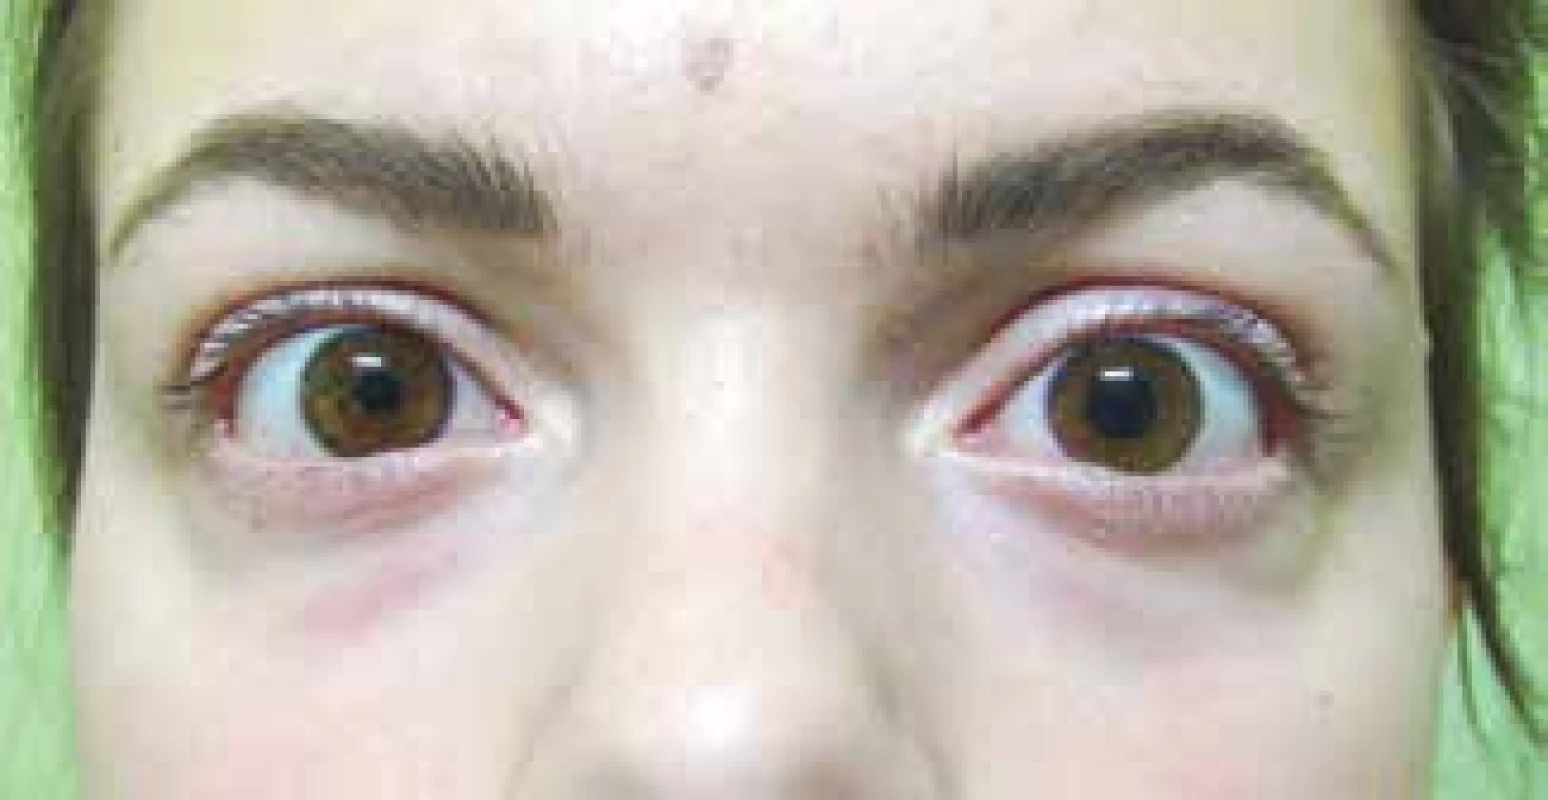 Negative result of pharmacological test with
application of 0.1% Pilocarpine in left eye